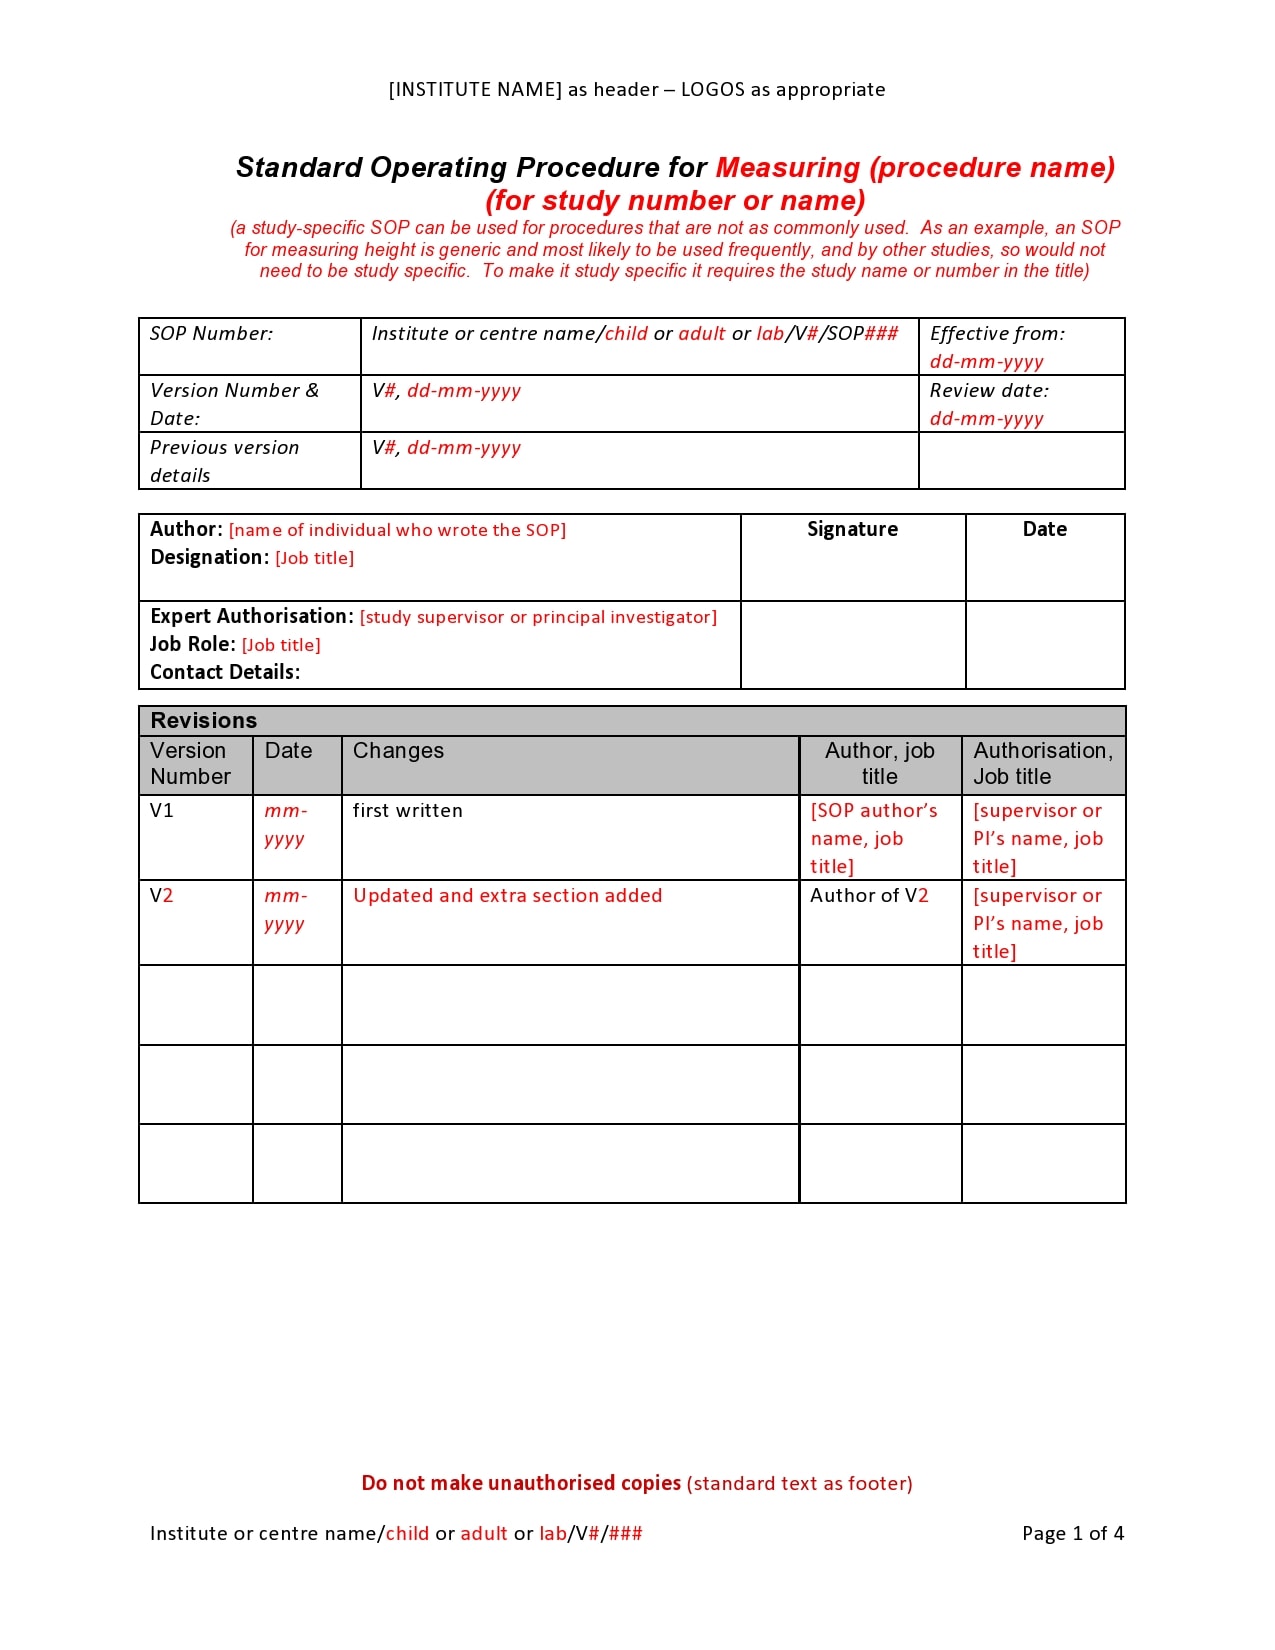 Free Standard Operating Procedure Template Word 20 Toptemplate.my.id